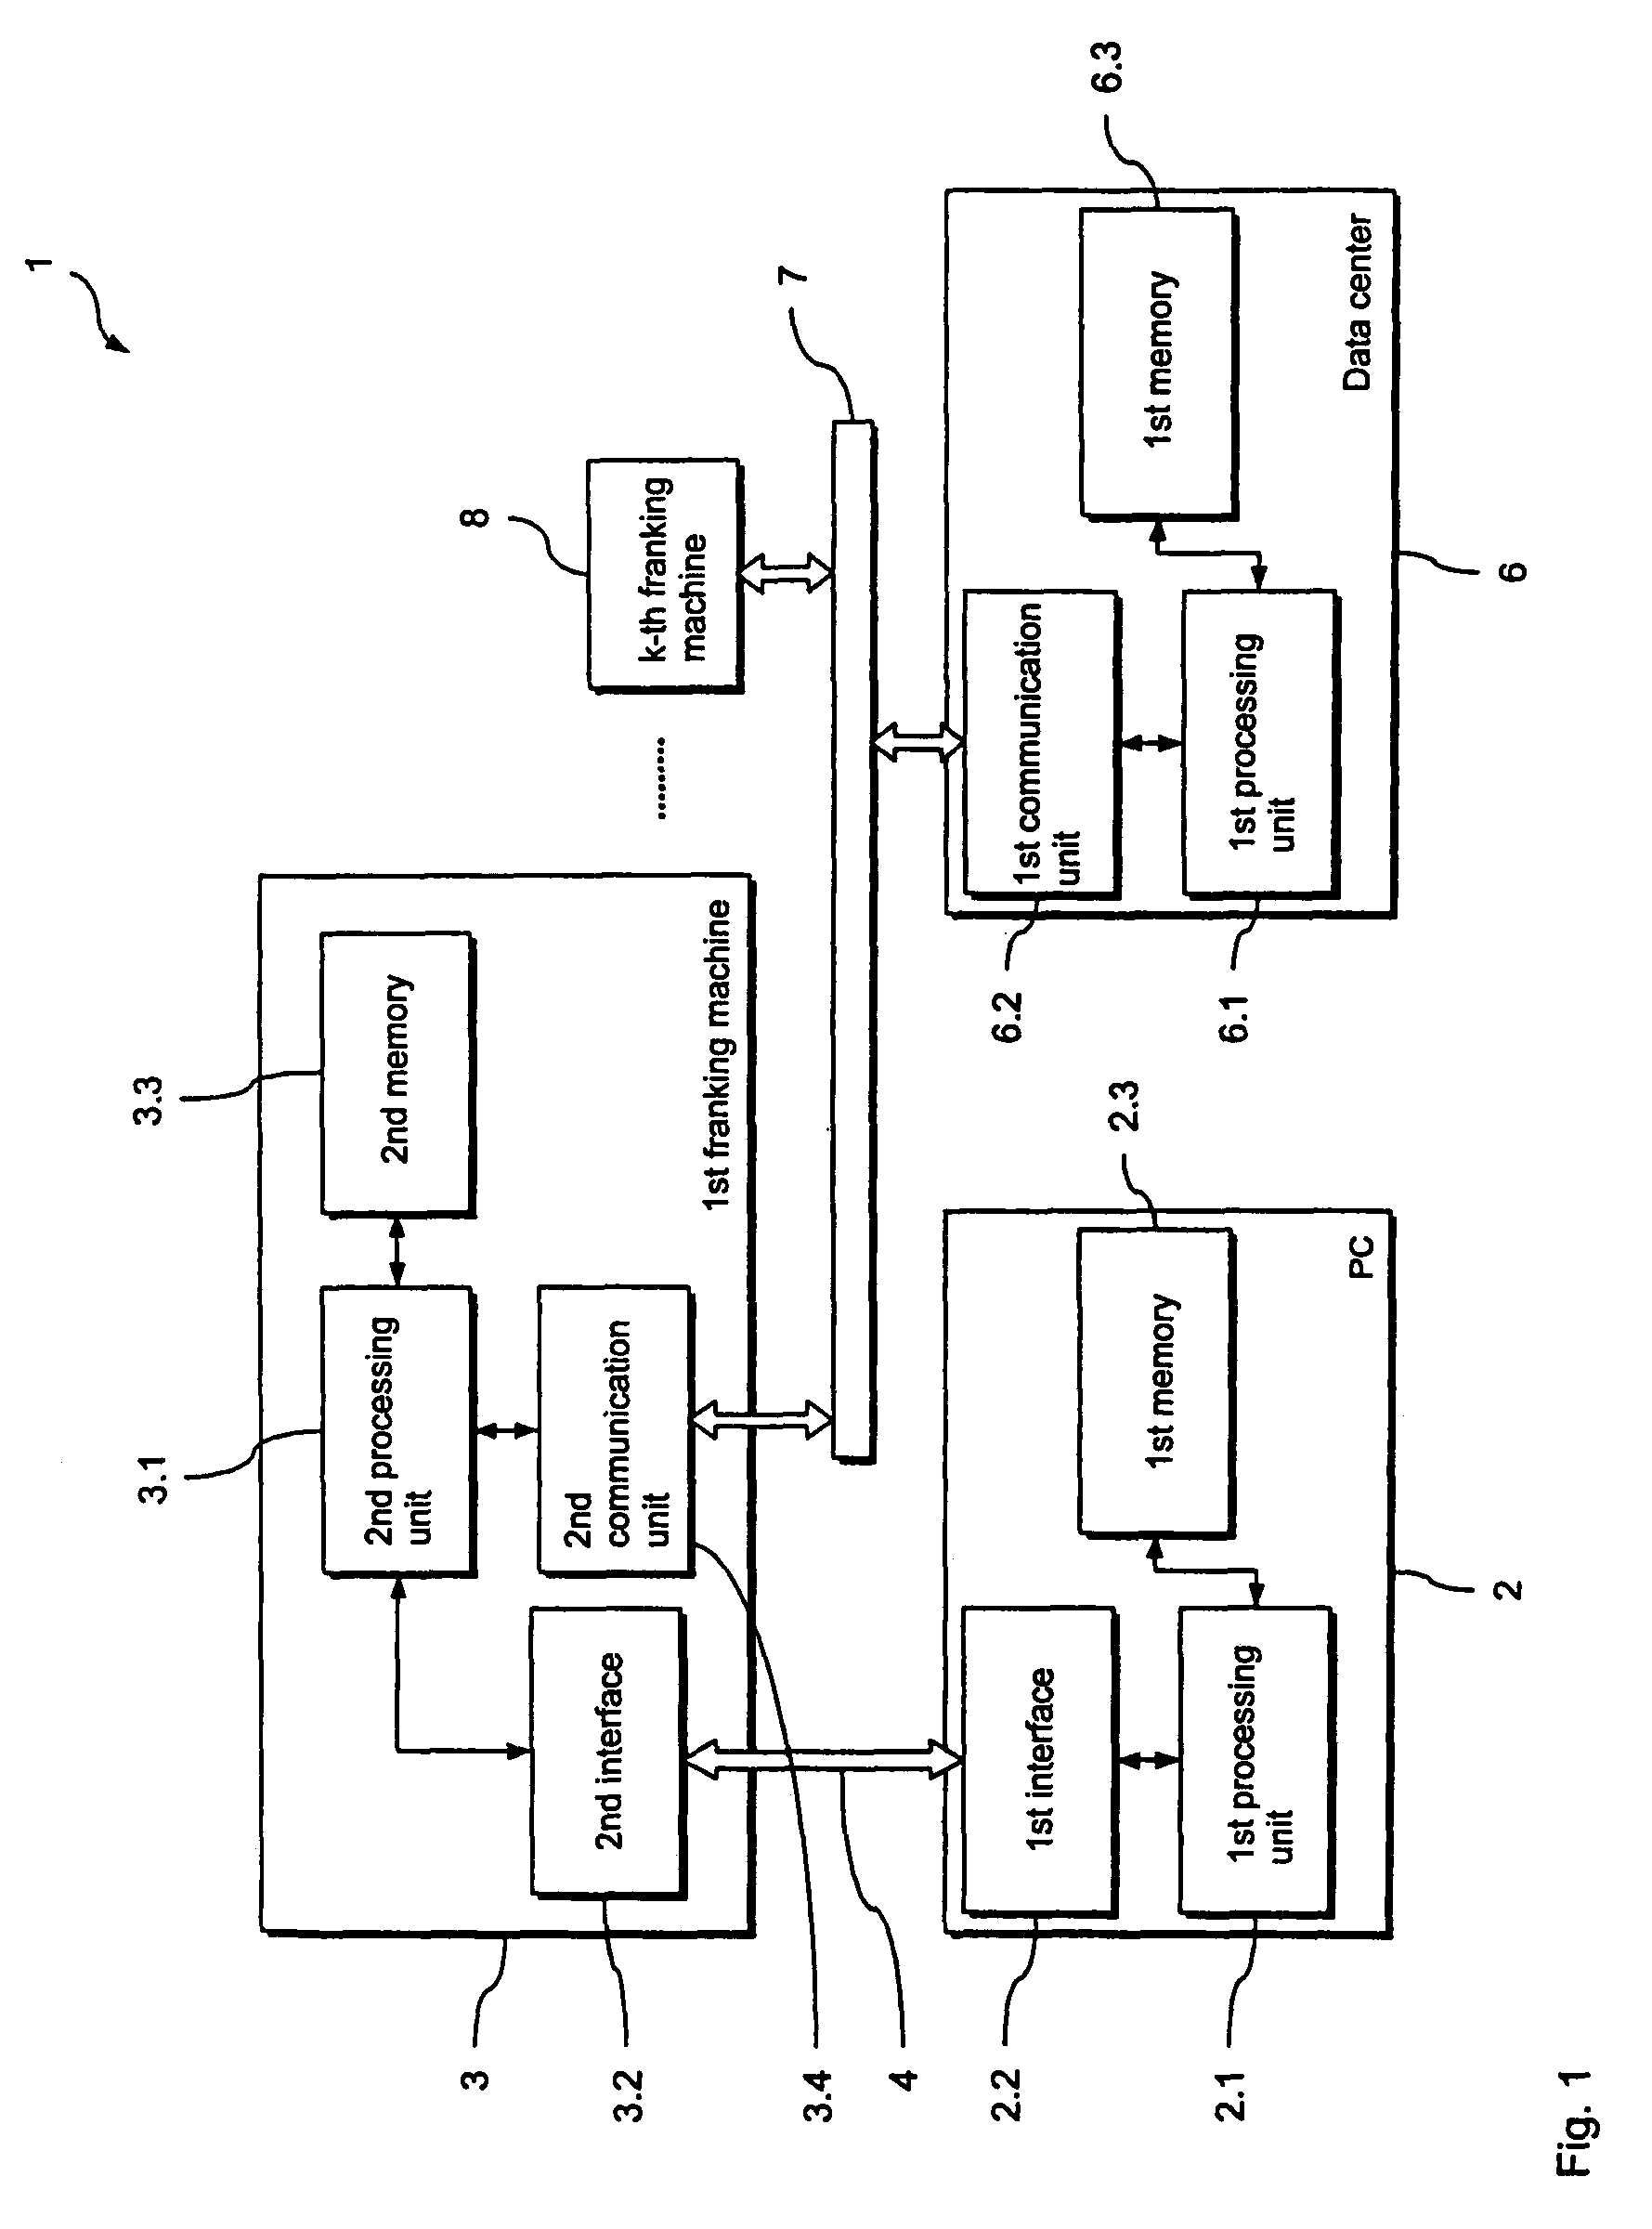 Method for preparation of data for loading into a data processing device